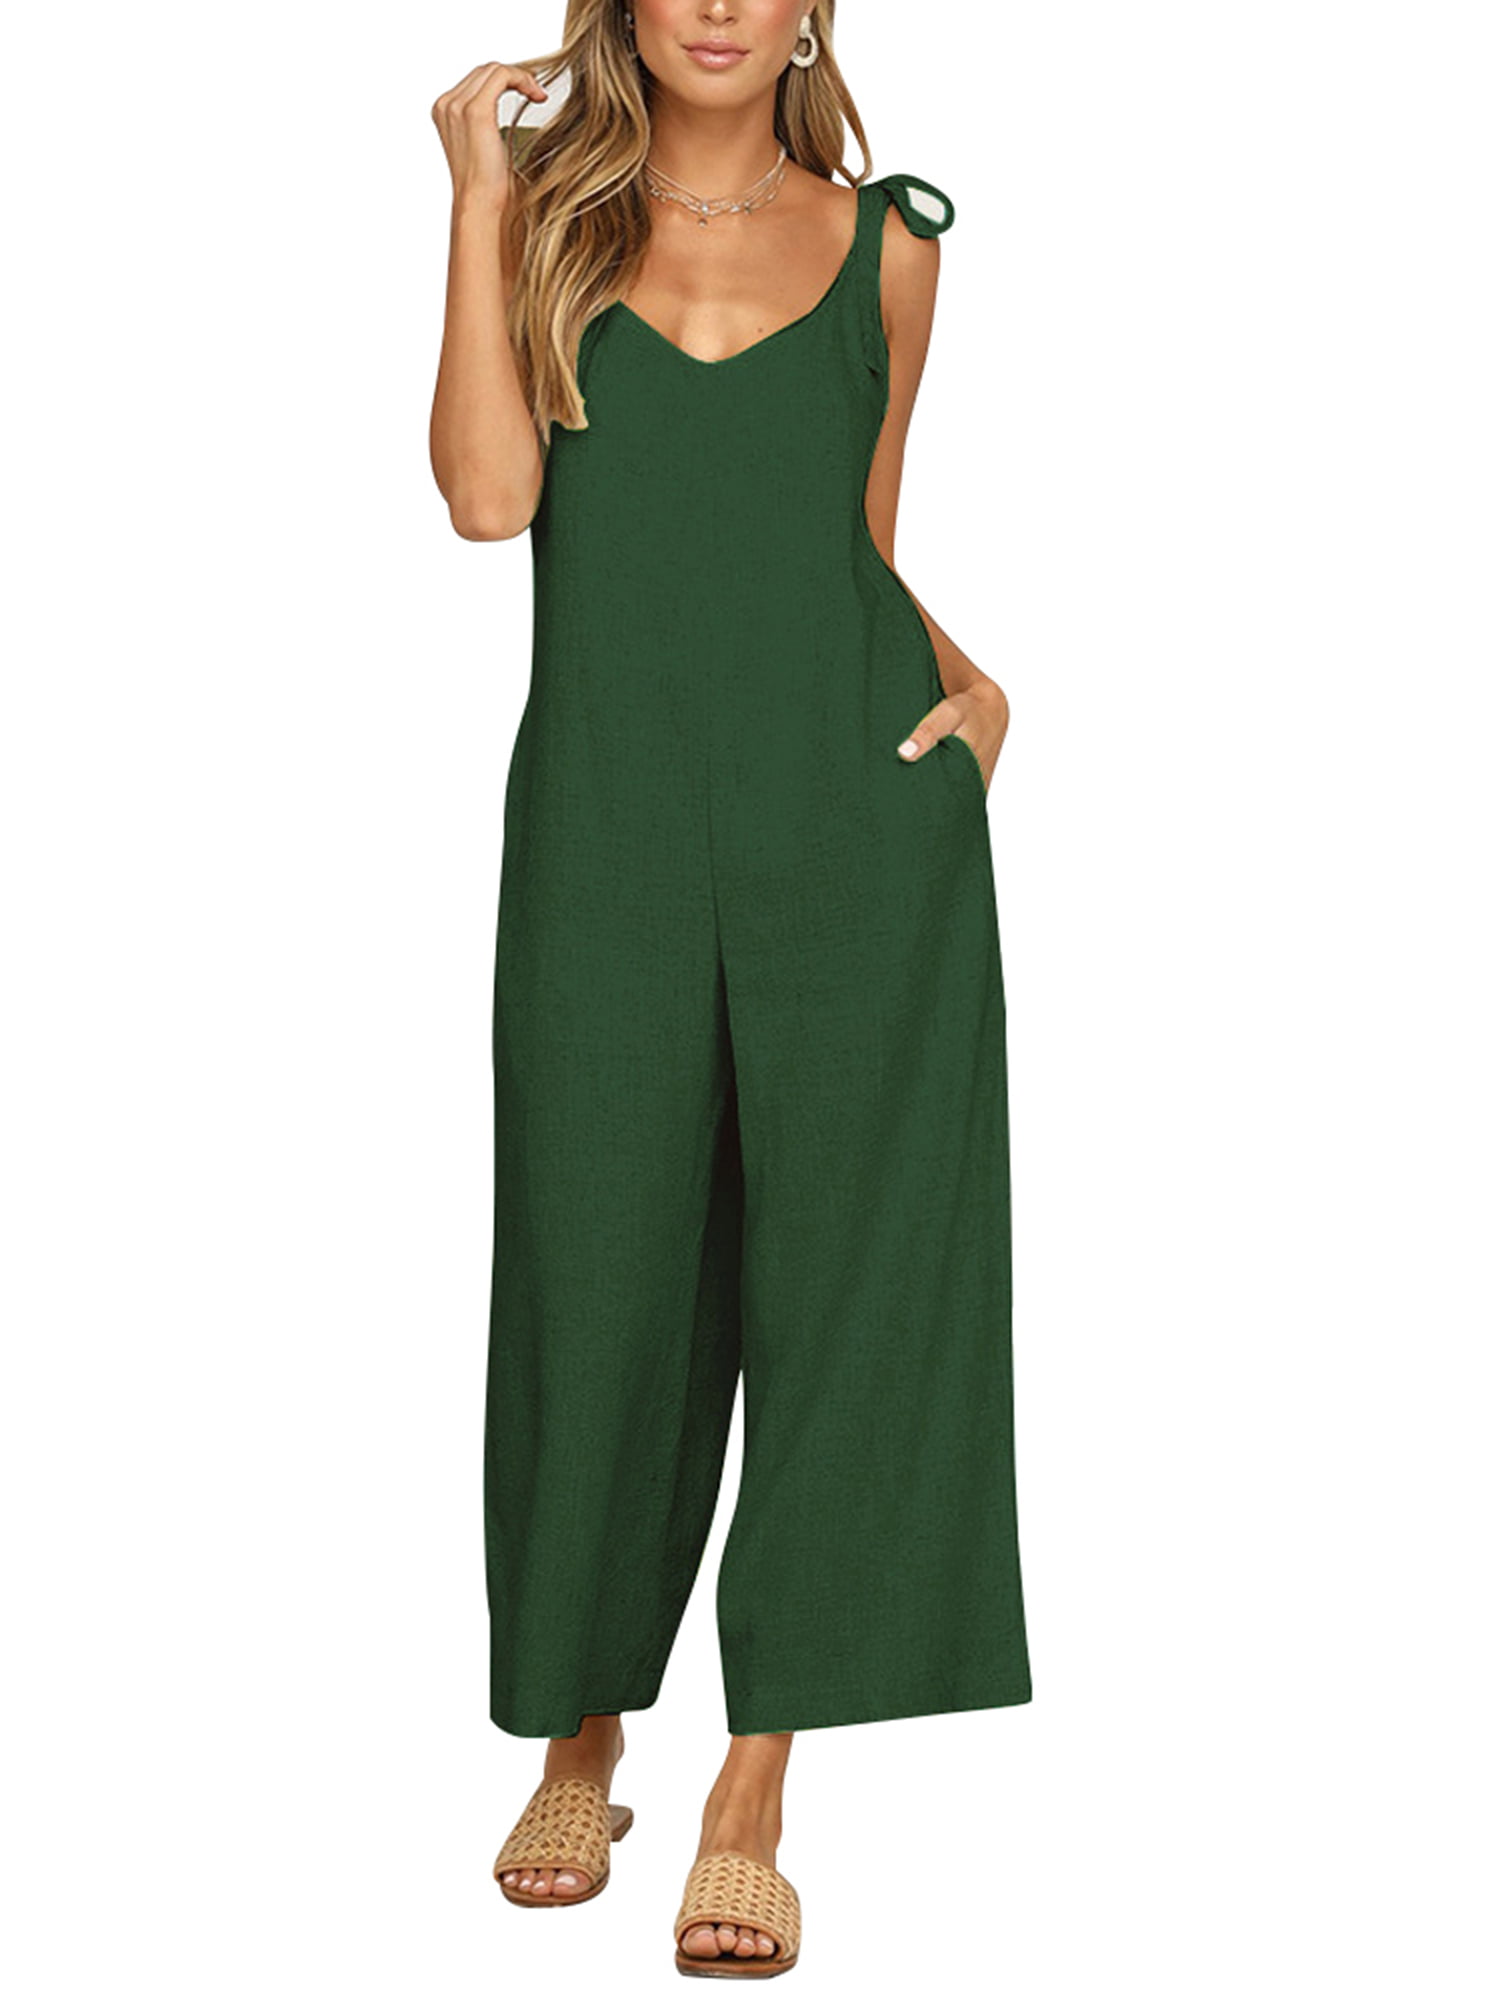 Women Holiday Casual Loose Jumpsuit Playsuit Summer Rompers Dungarees Overalls 